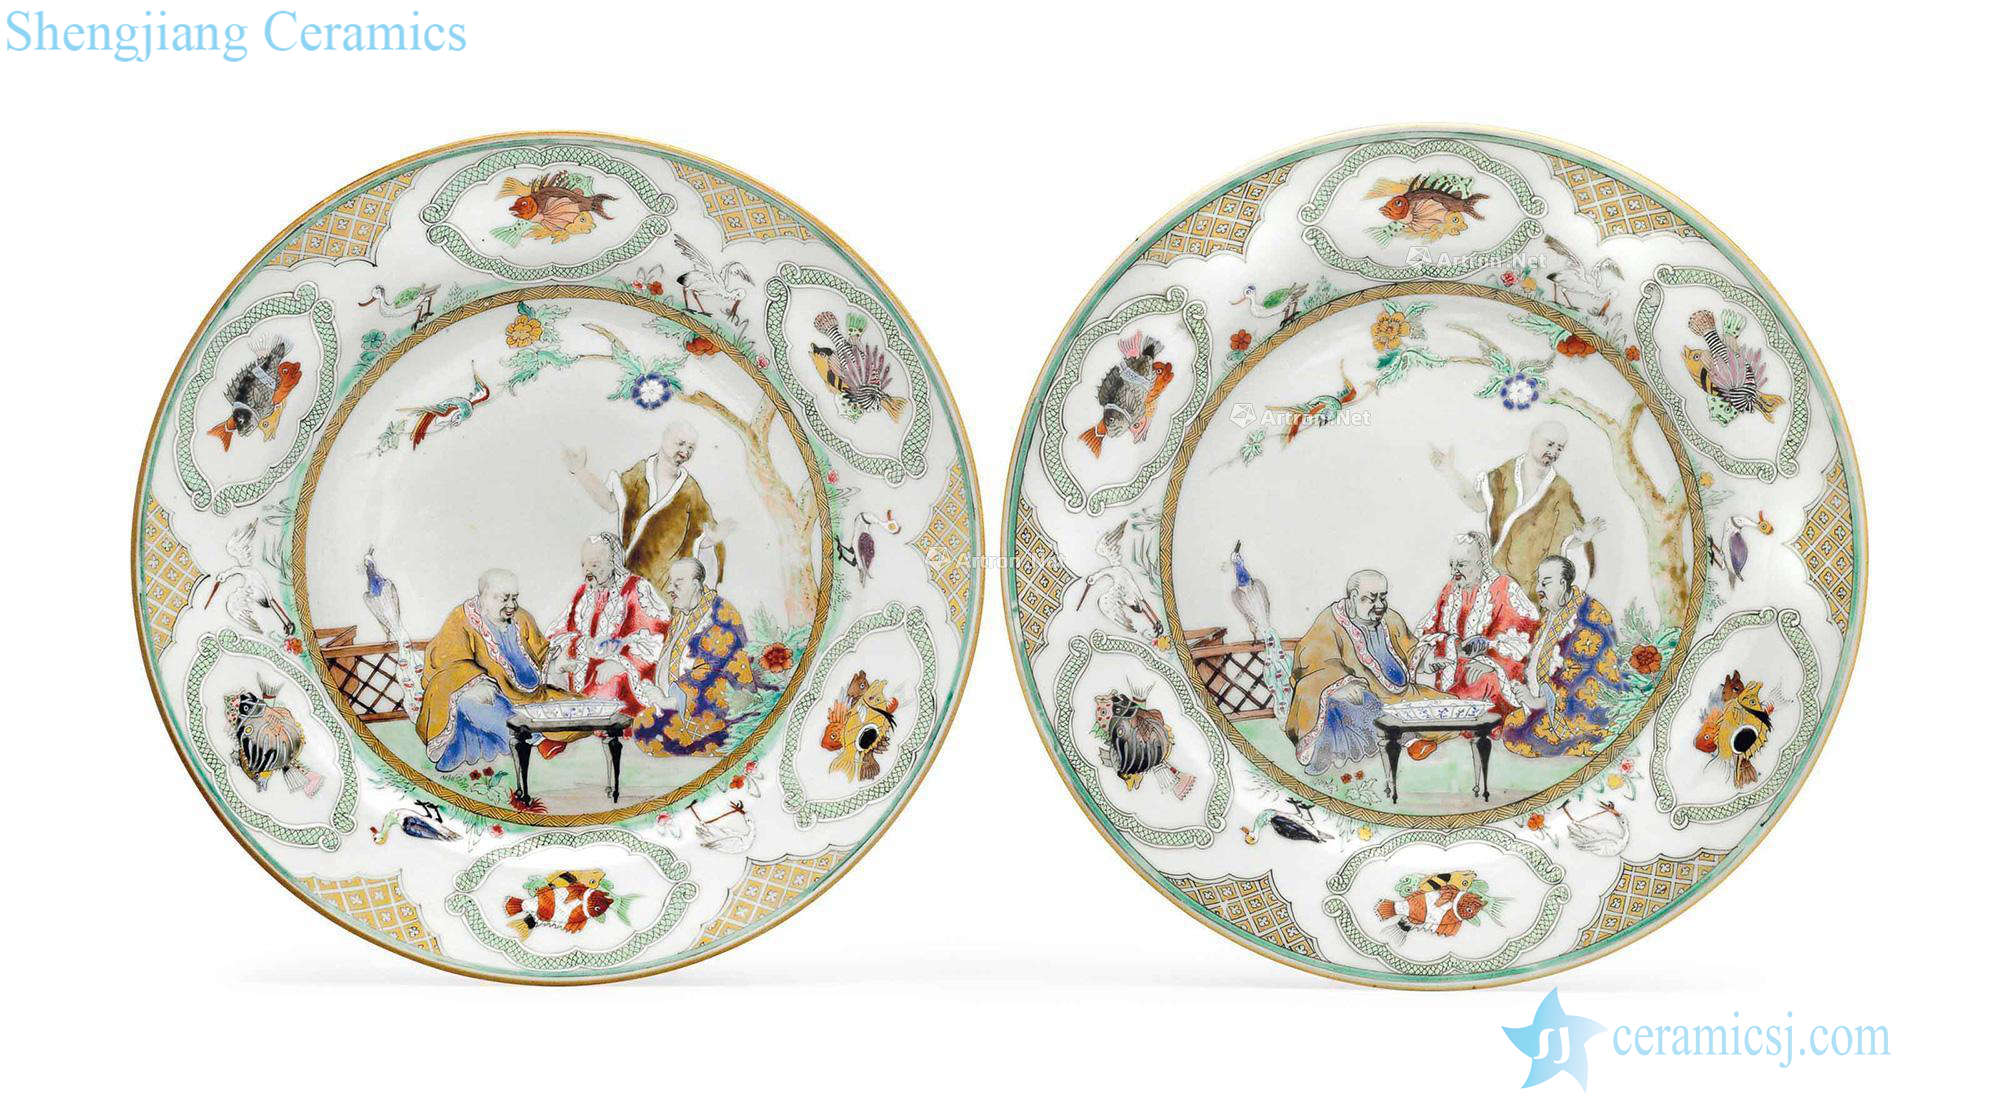 Qianlong period, about 1738 A PAIR OF FAMILLE ROSE "PRONK tempe 'DISHES